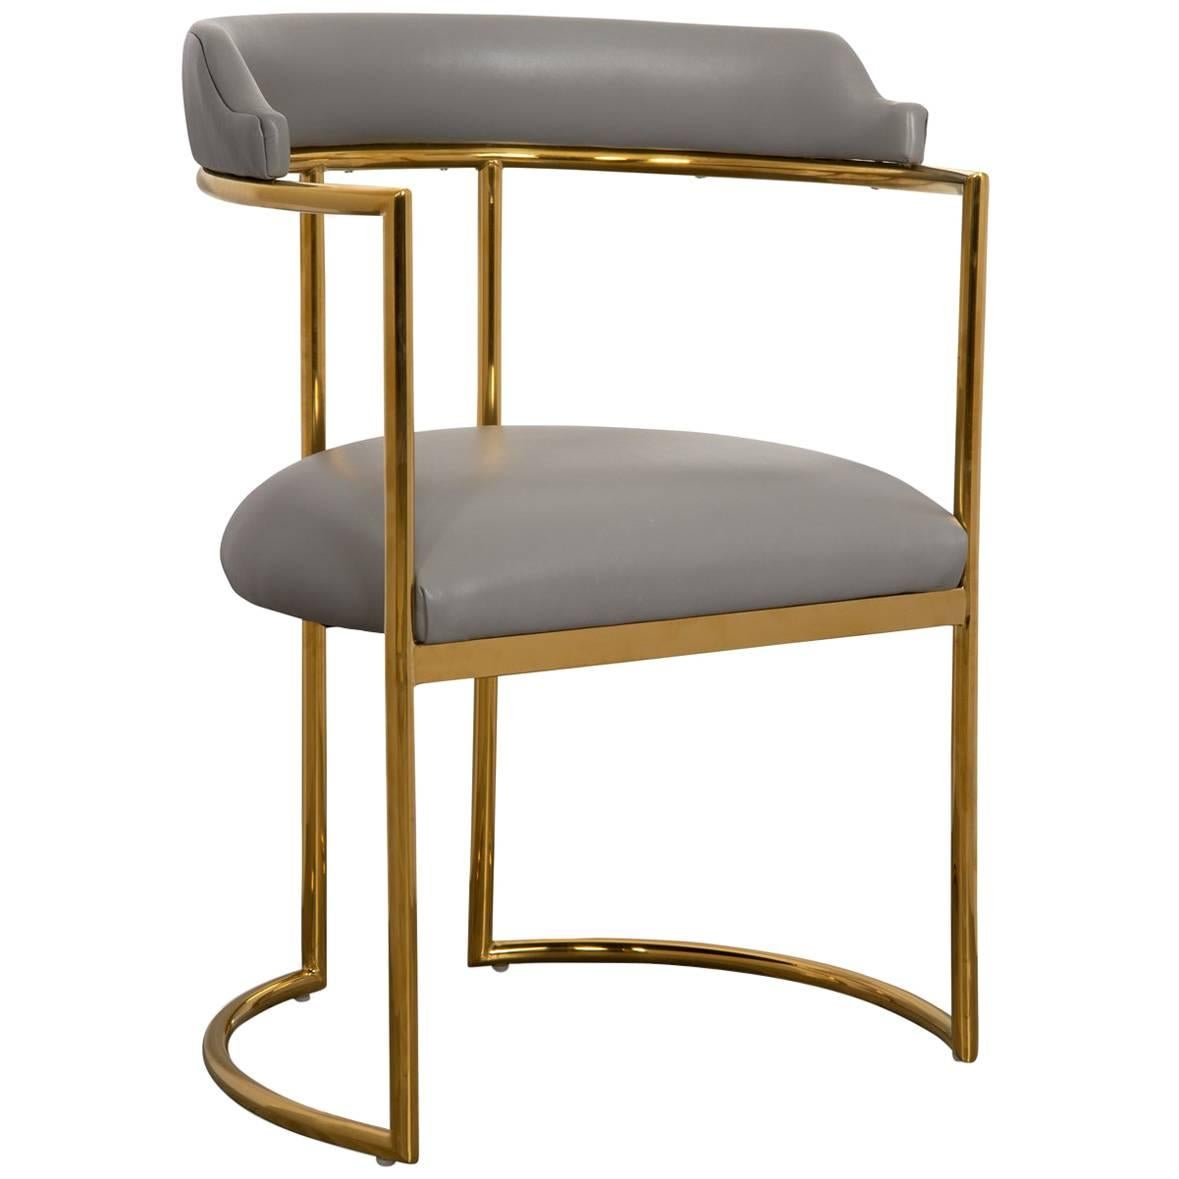 Modern Curved Dining Chair in Grey leather with Brass Frame Acapulco 2